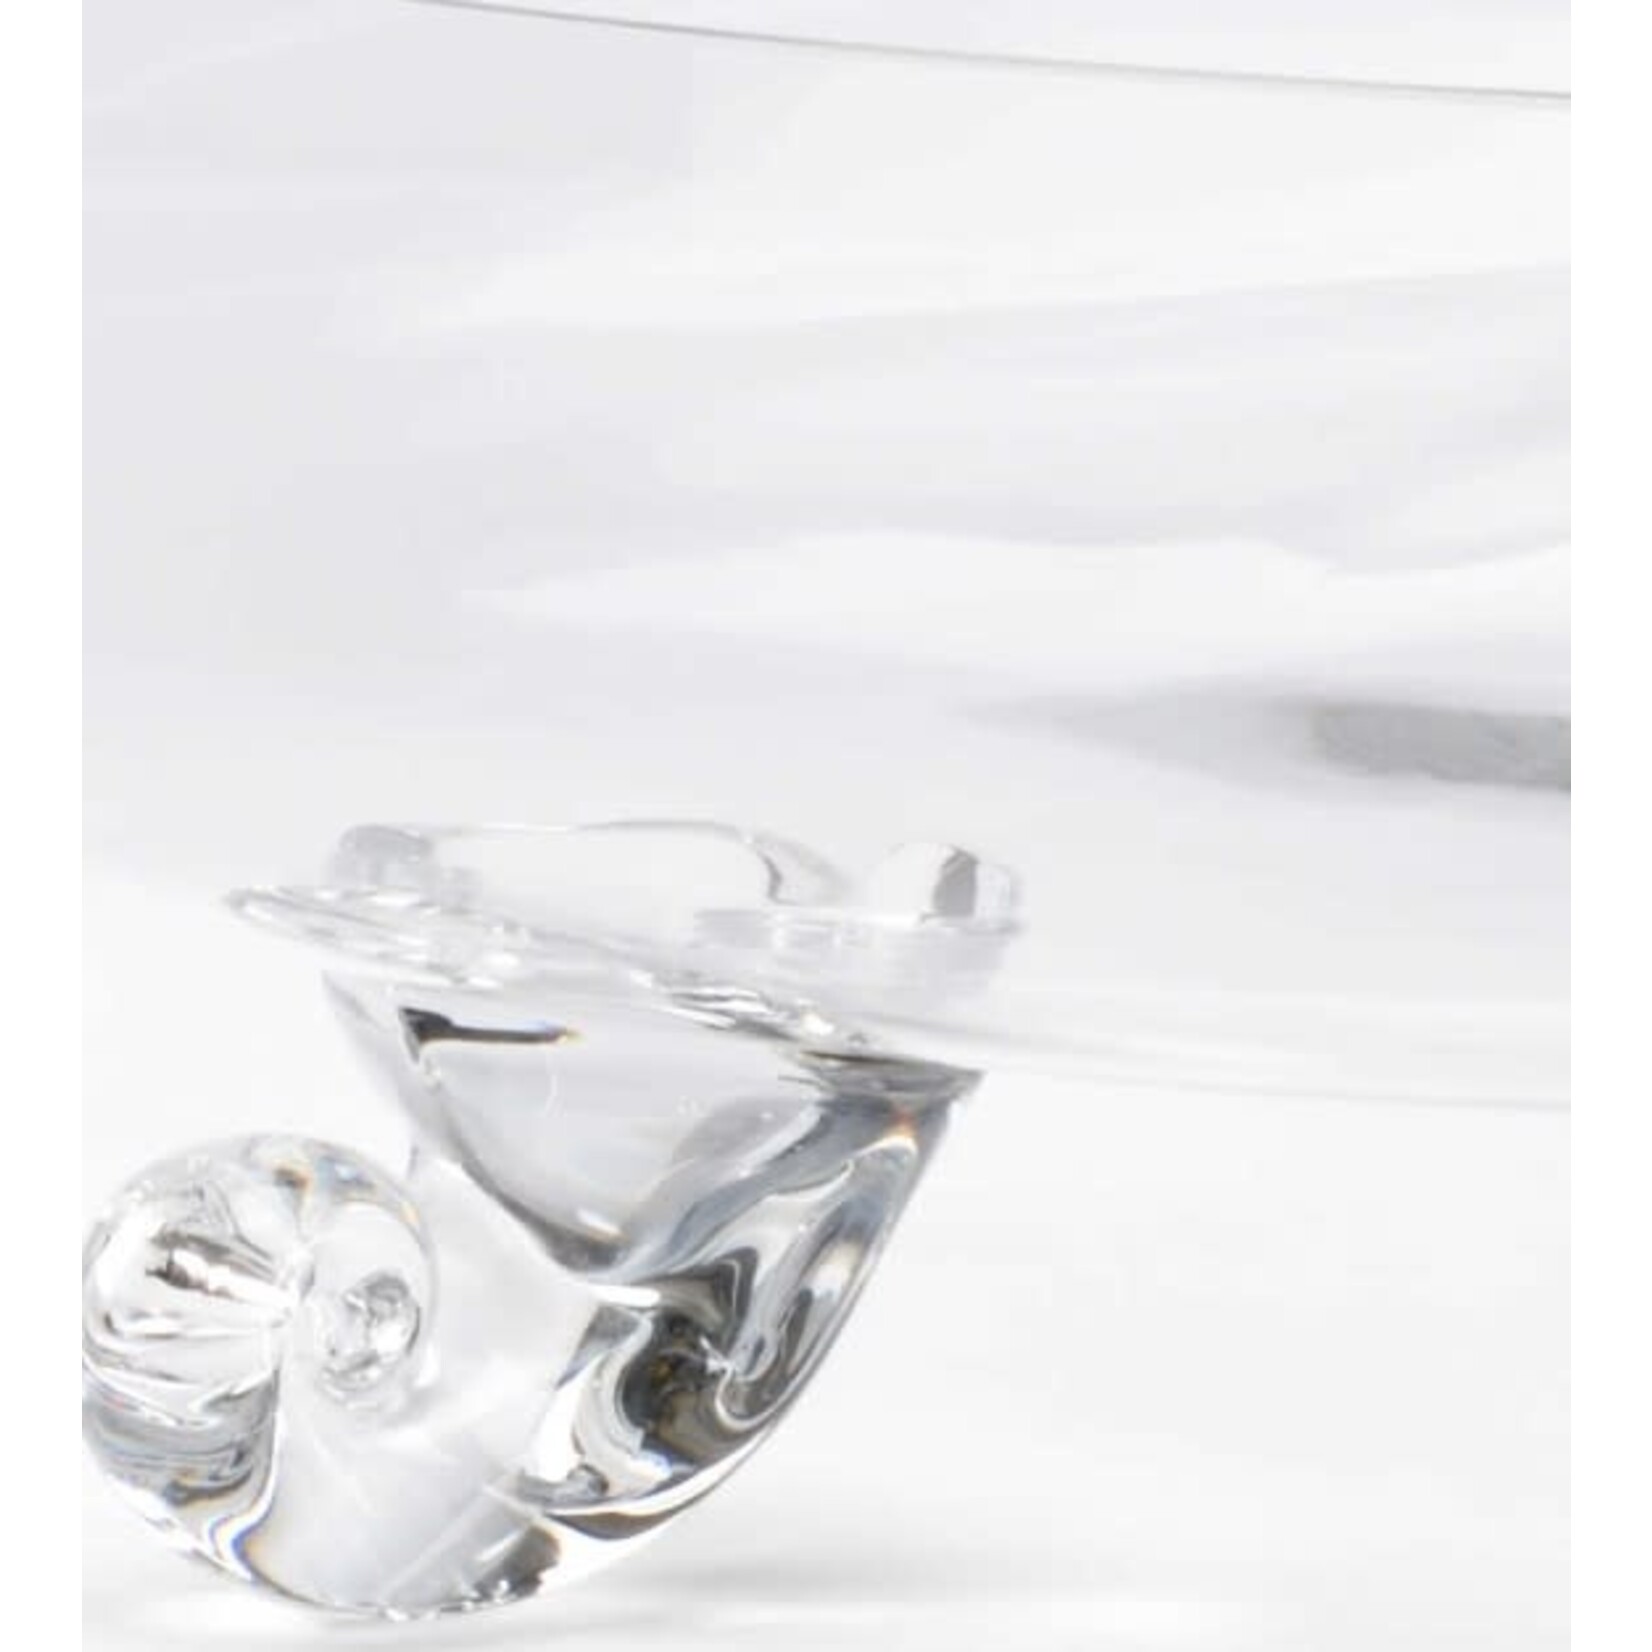 Wildwood Crystal Footed Centerpiece Bowl